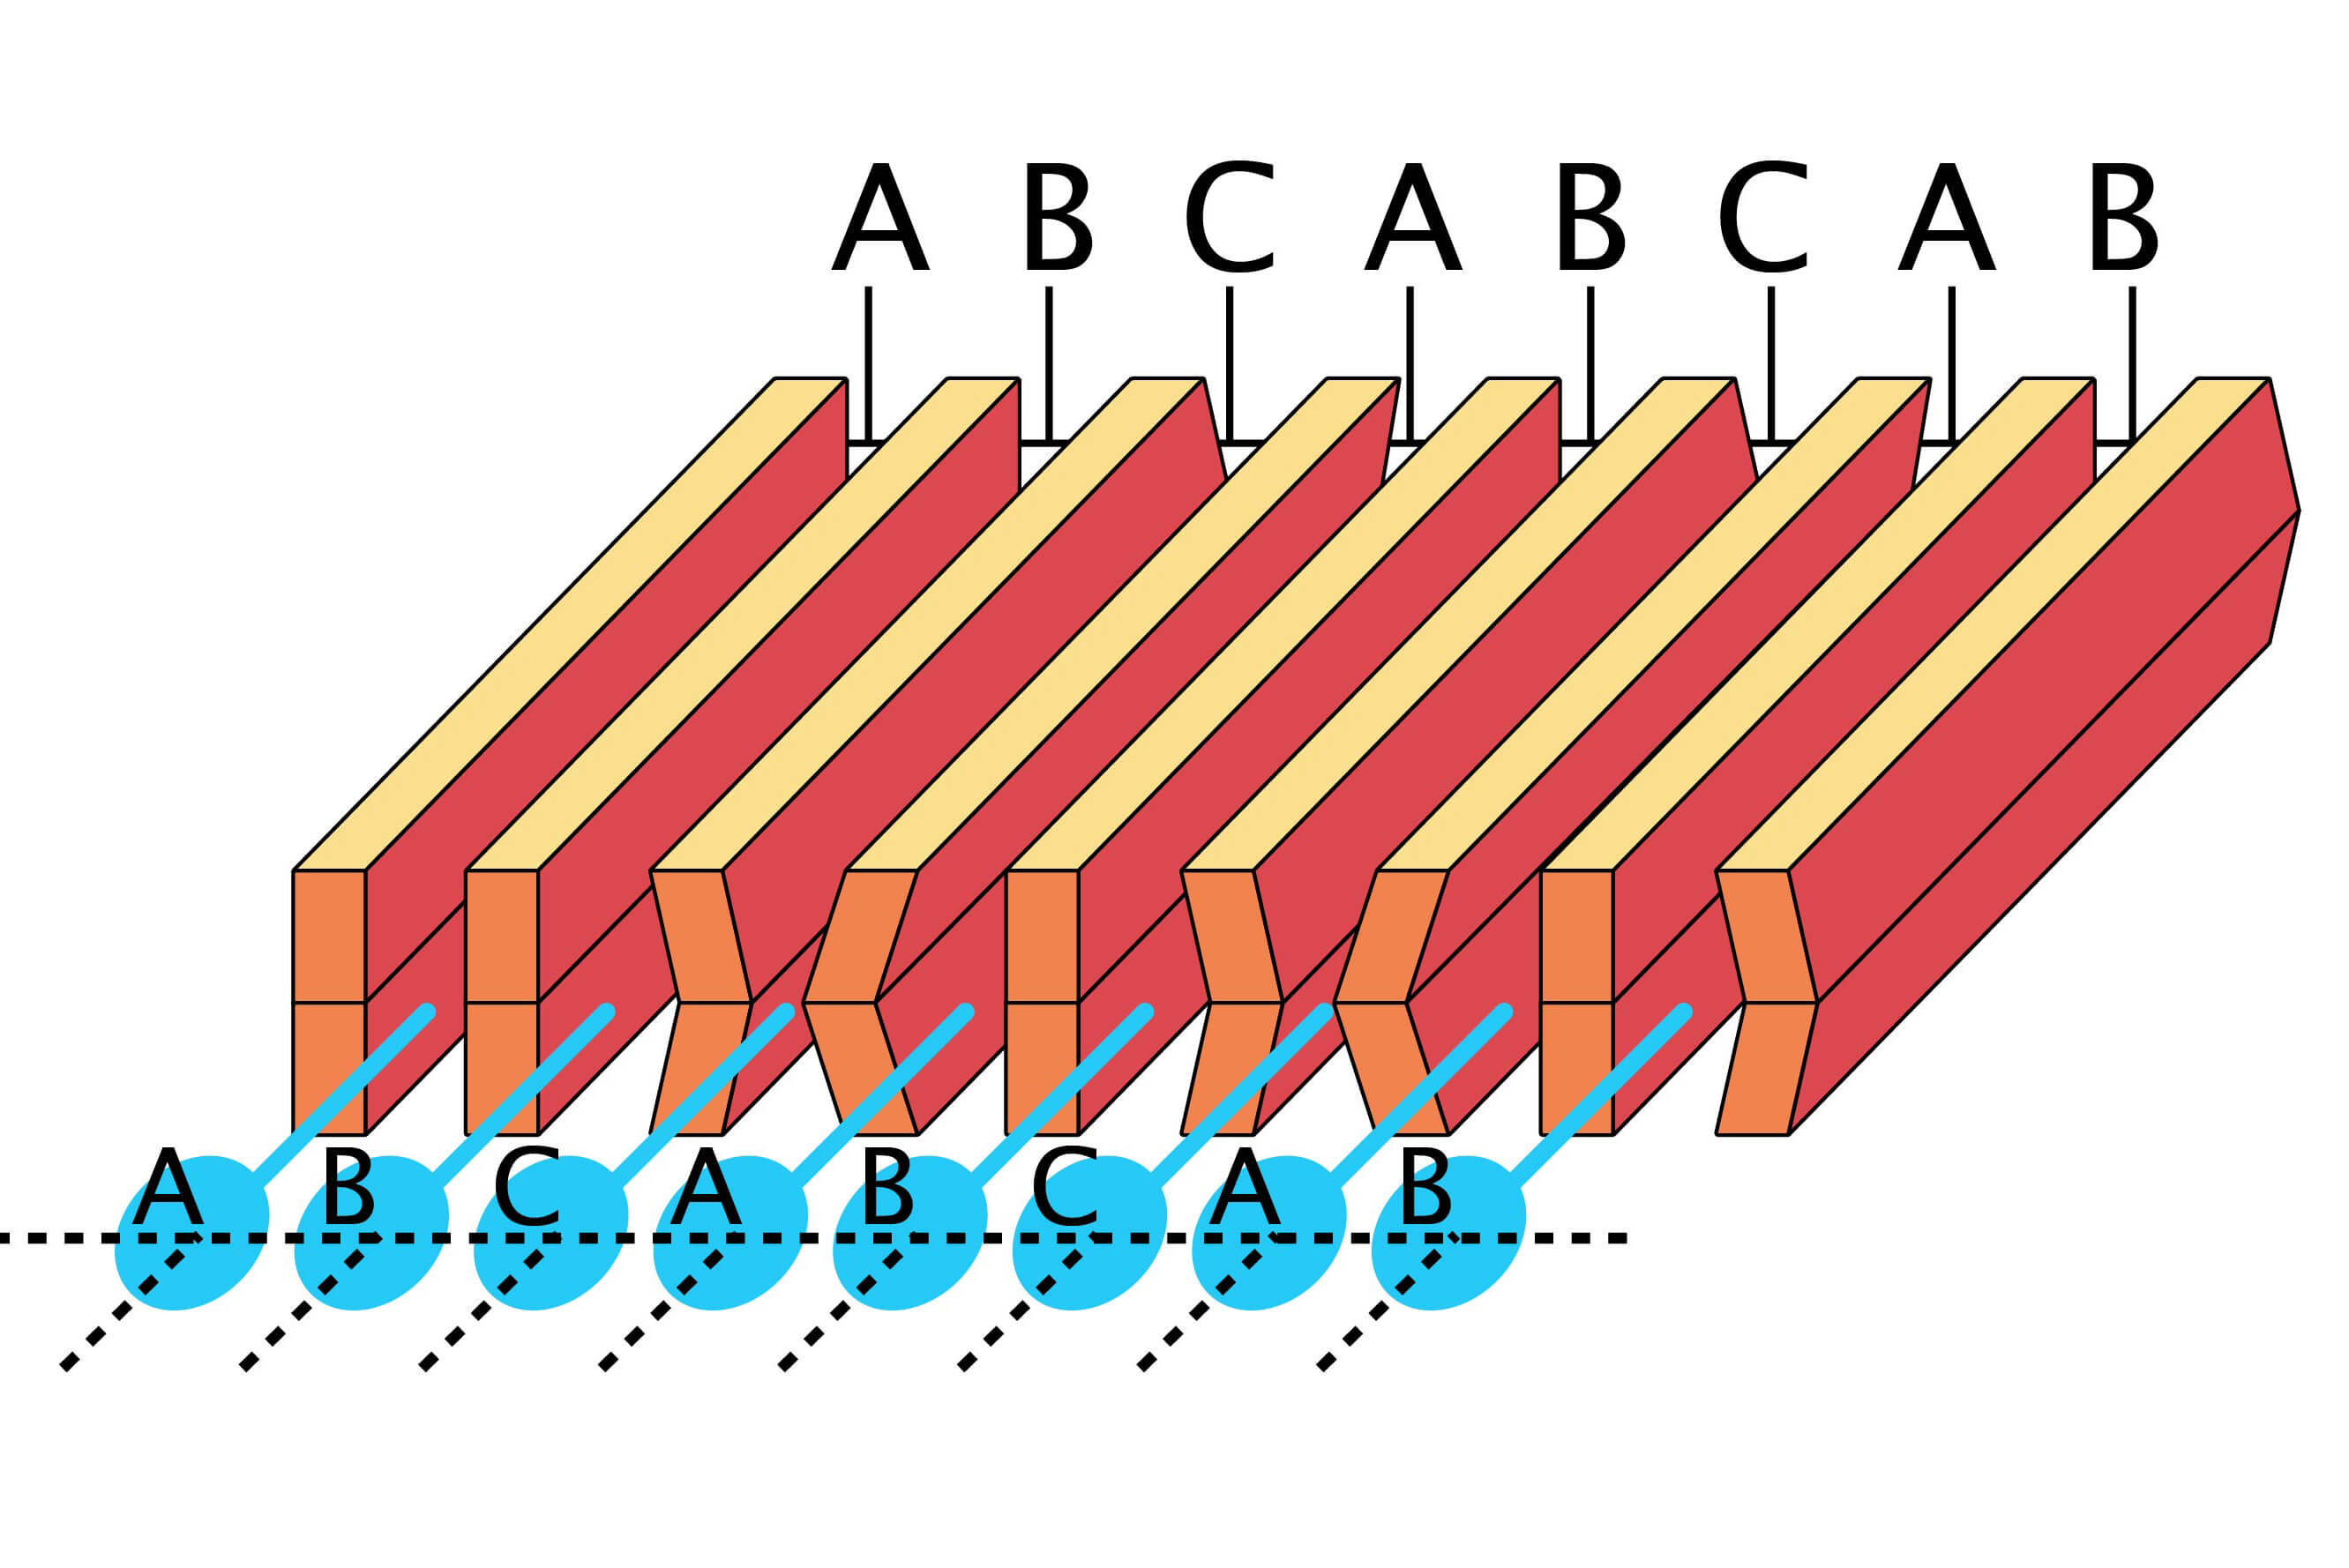 After ejection from channel-B, ink is ejected from channel-C to complete the image.